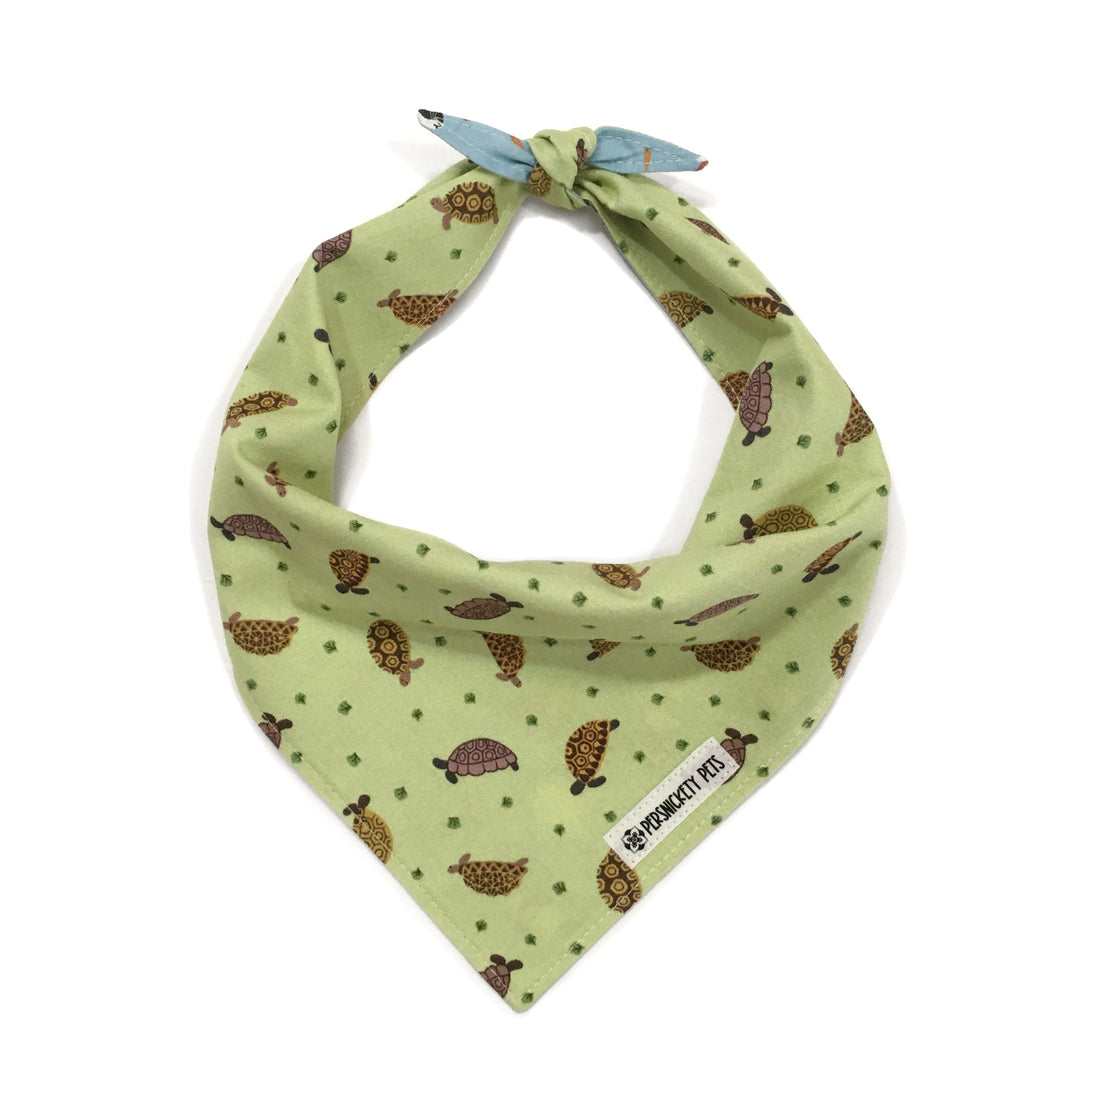 Persnickety Pets: Small friends reversible bandana, turtles tied front